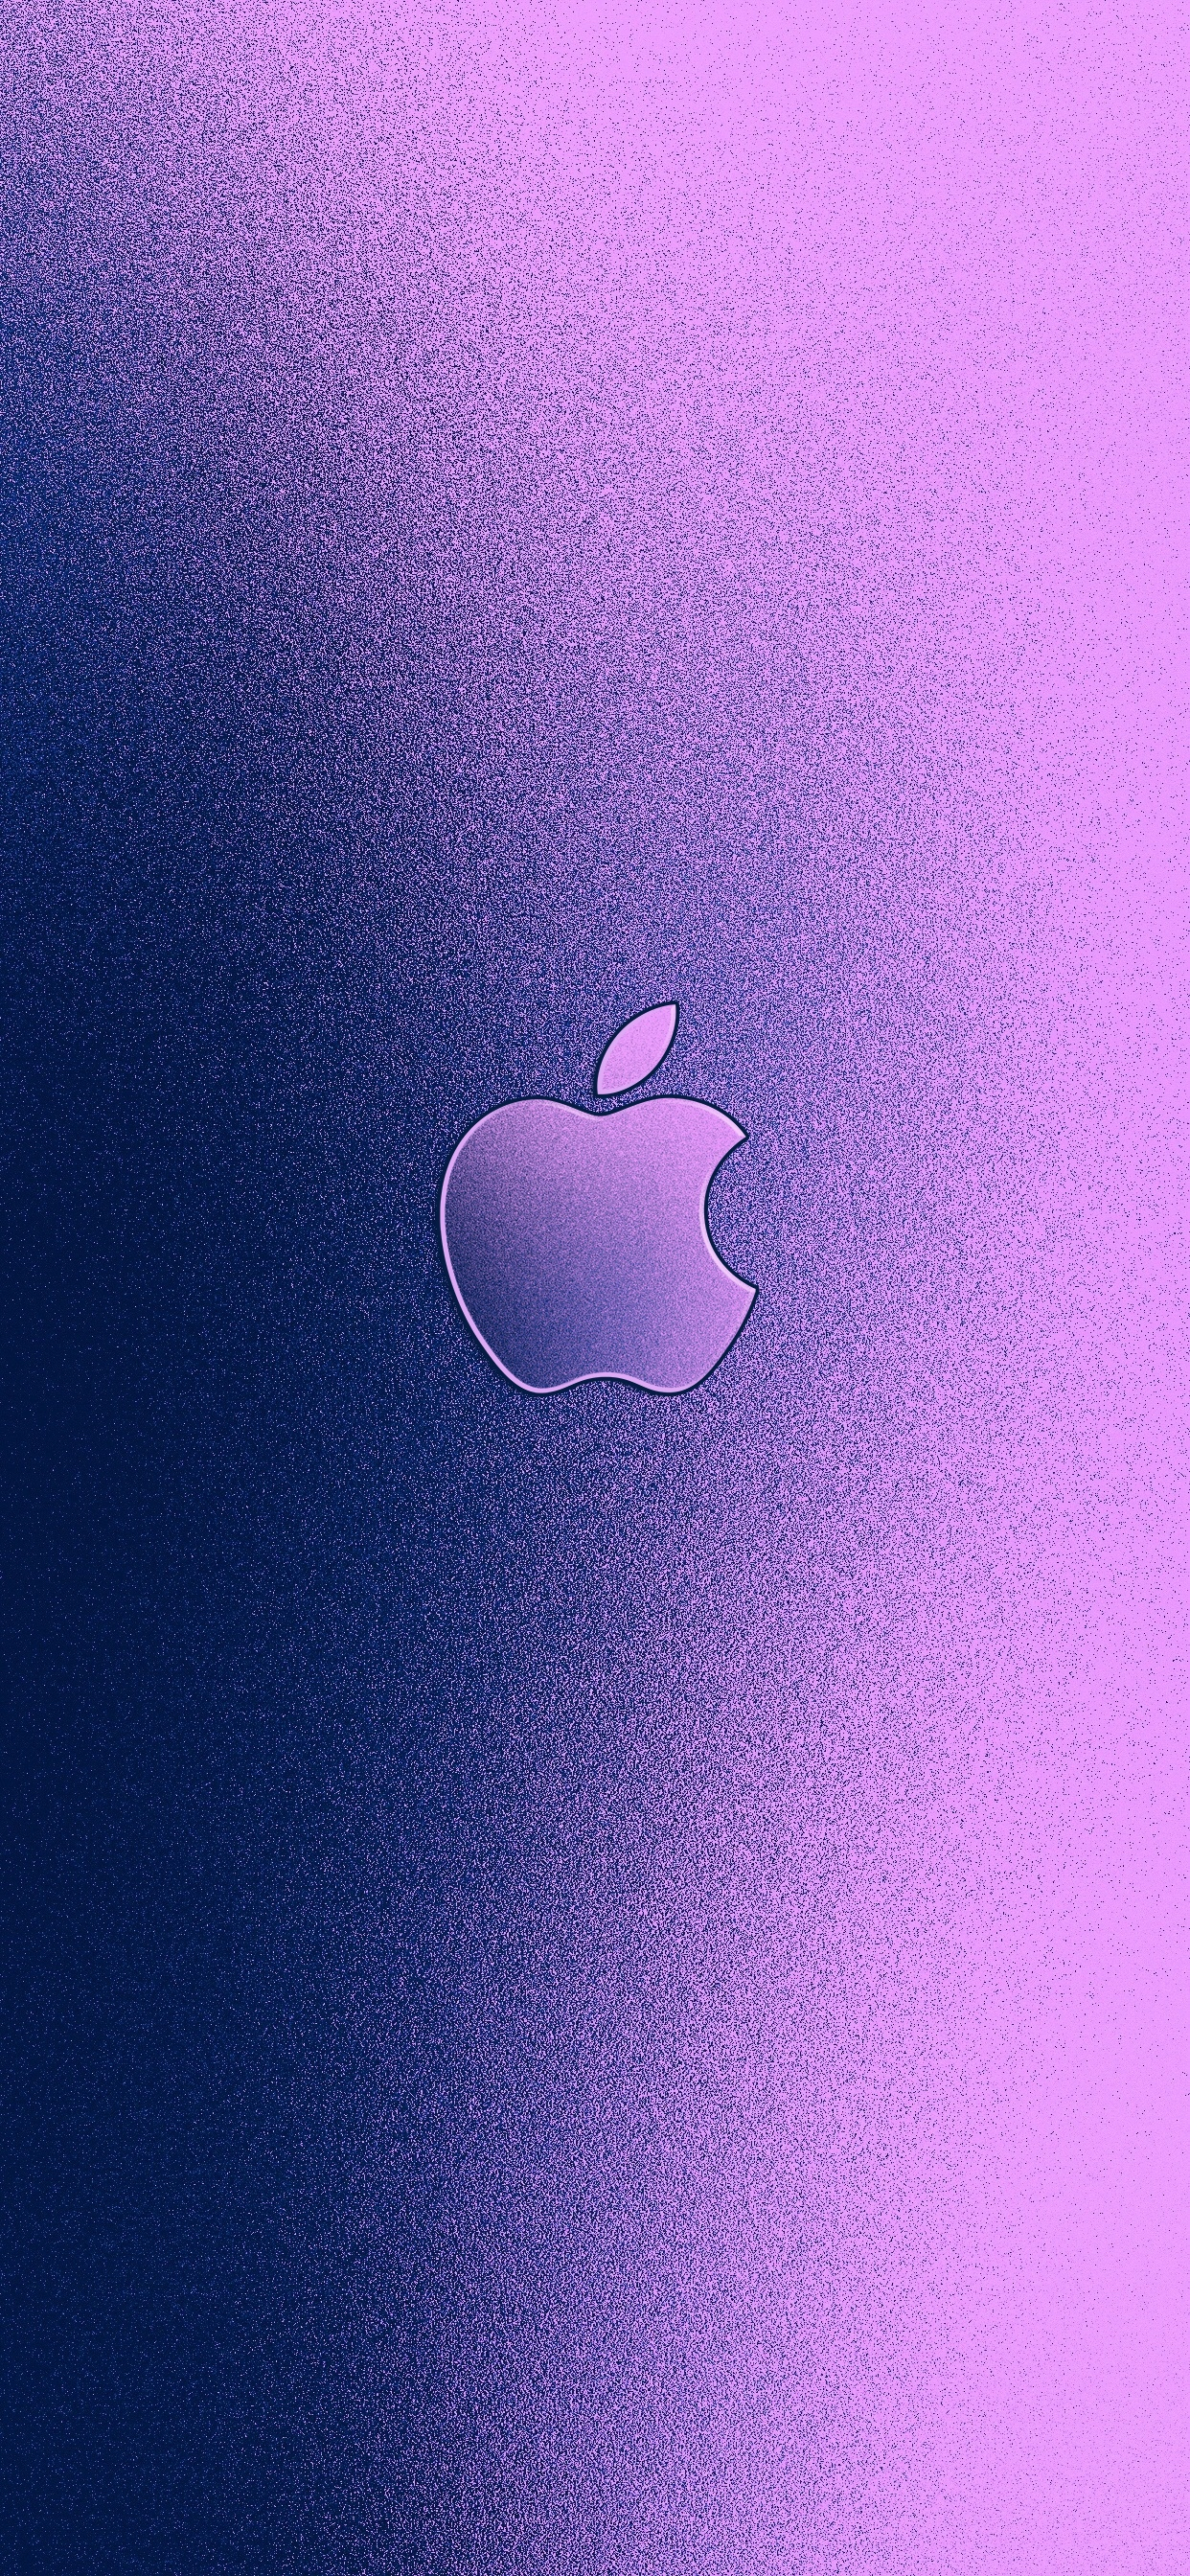 1242x2688 Aluminum Apple logo wallpapers for iPhone